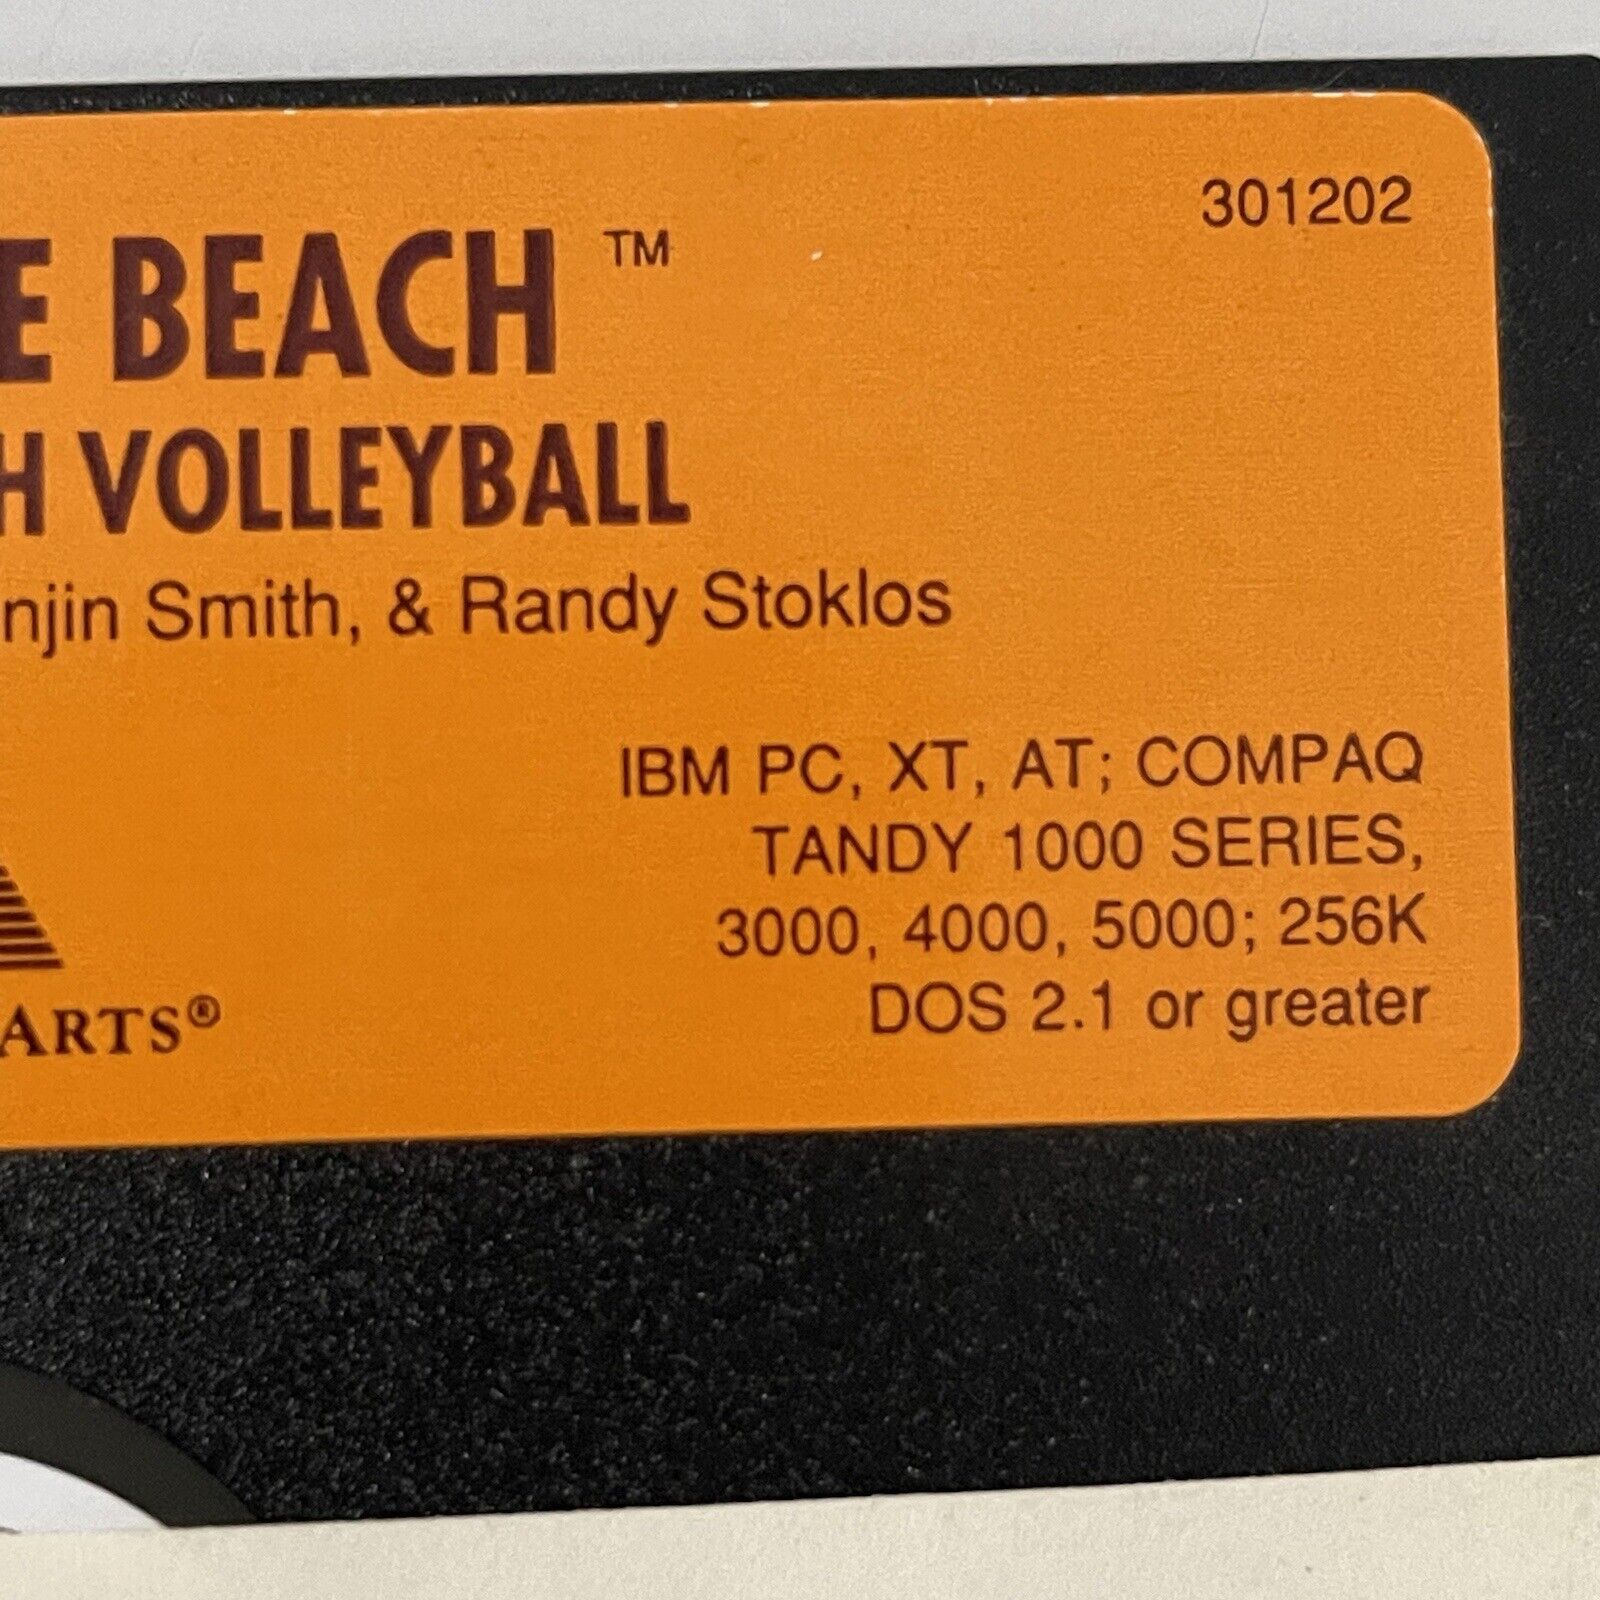 VTG 1988 Kings of the Beach Volleyball Game PC 5.25” Disk Electronic Arts WORKS